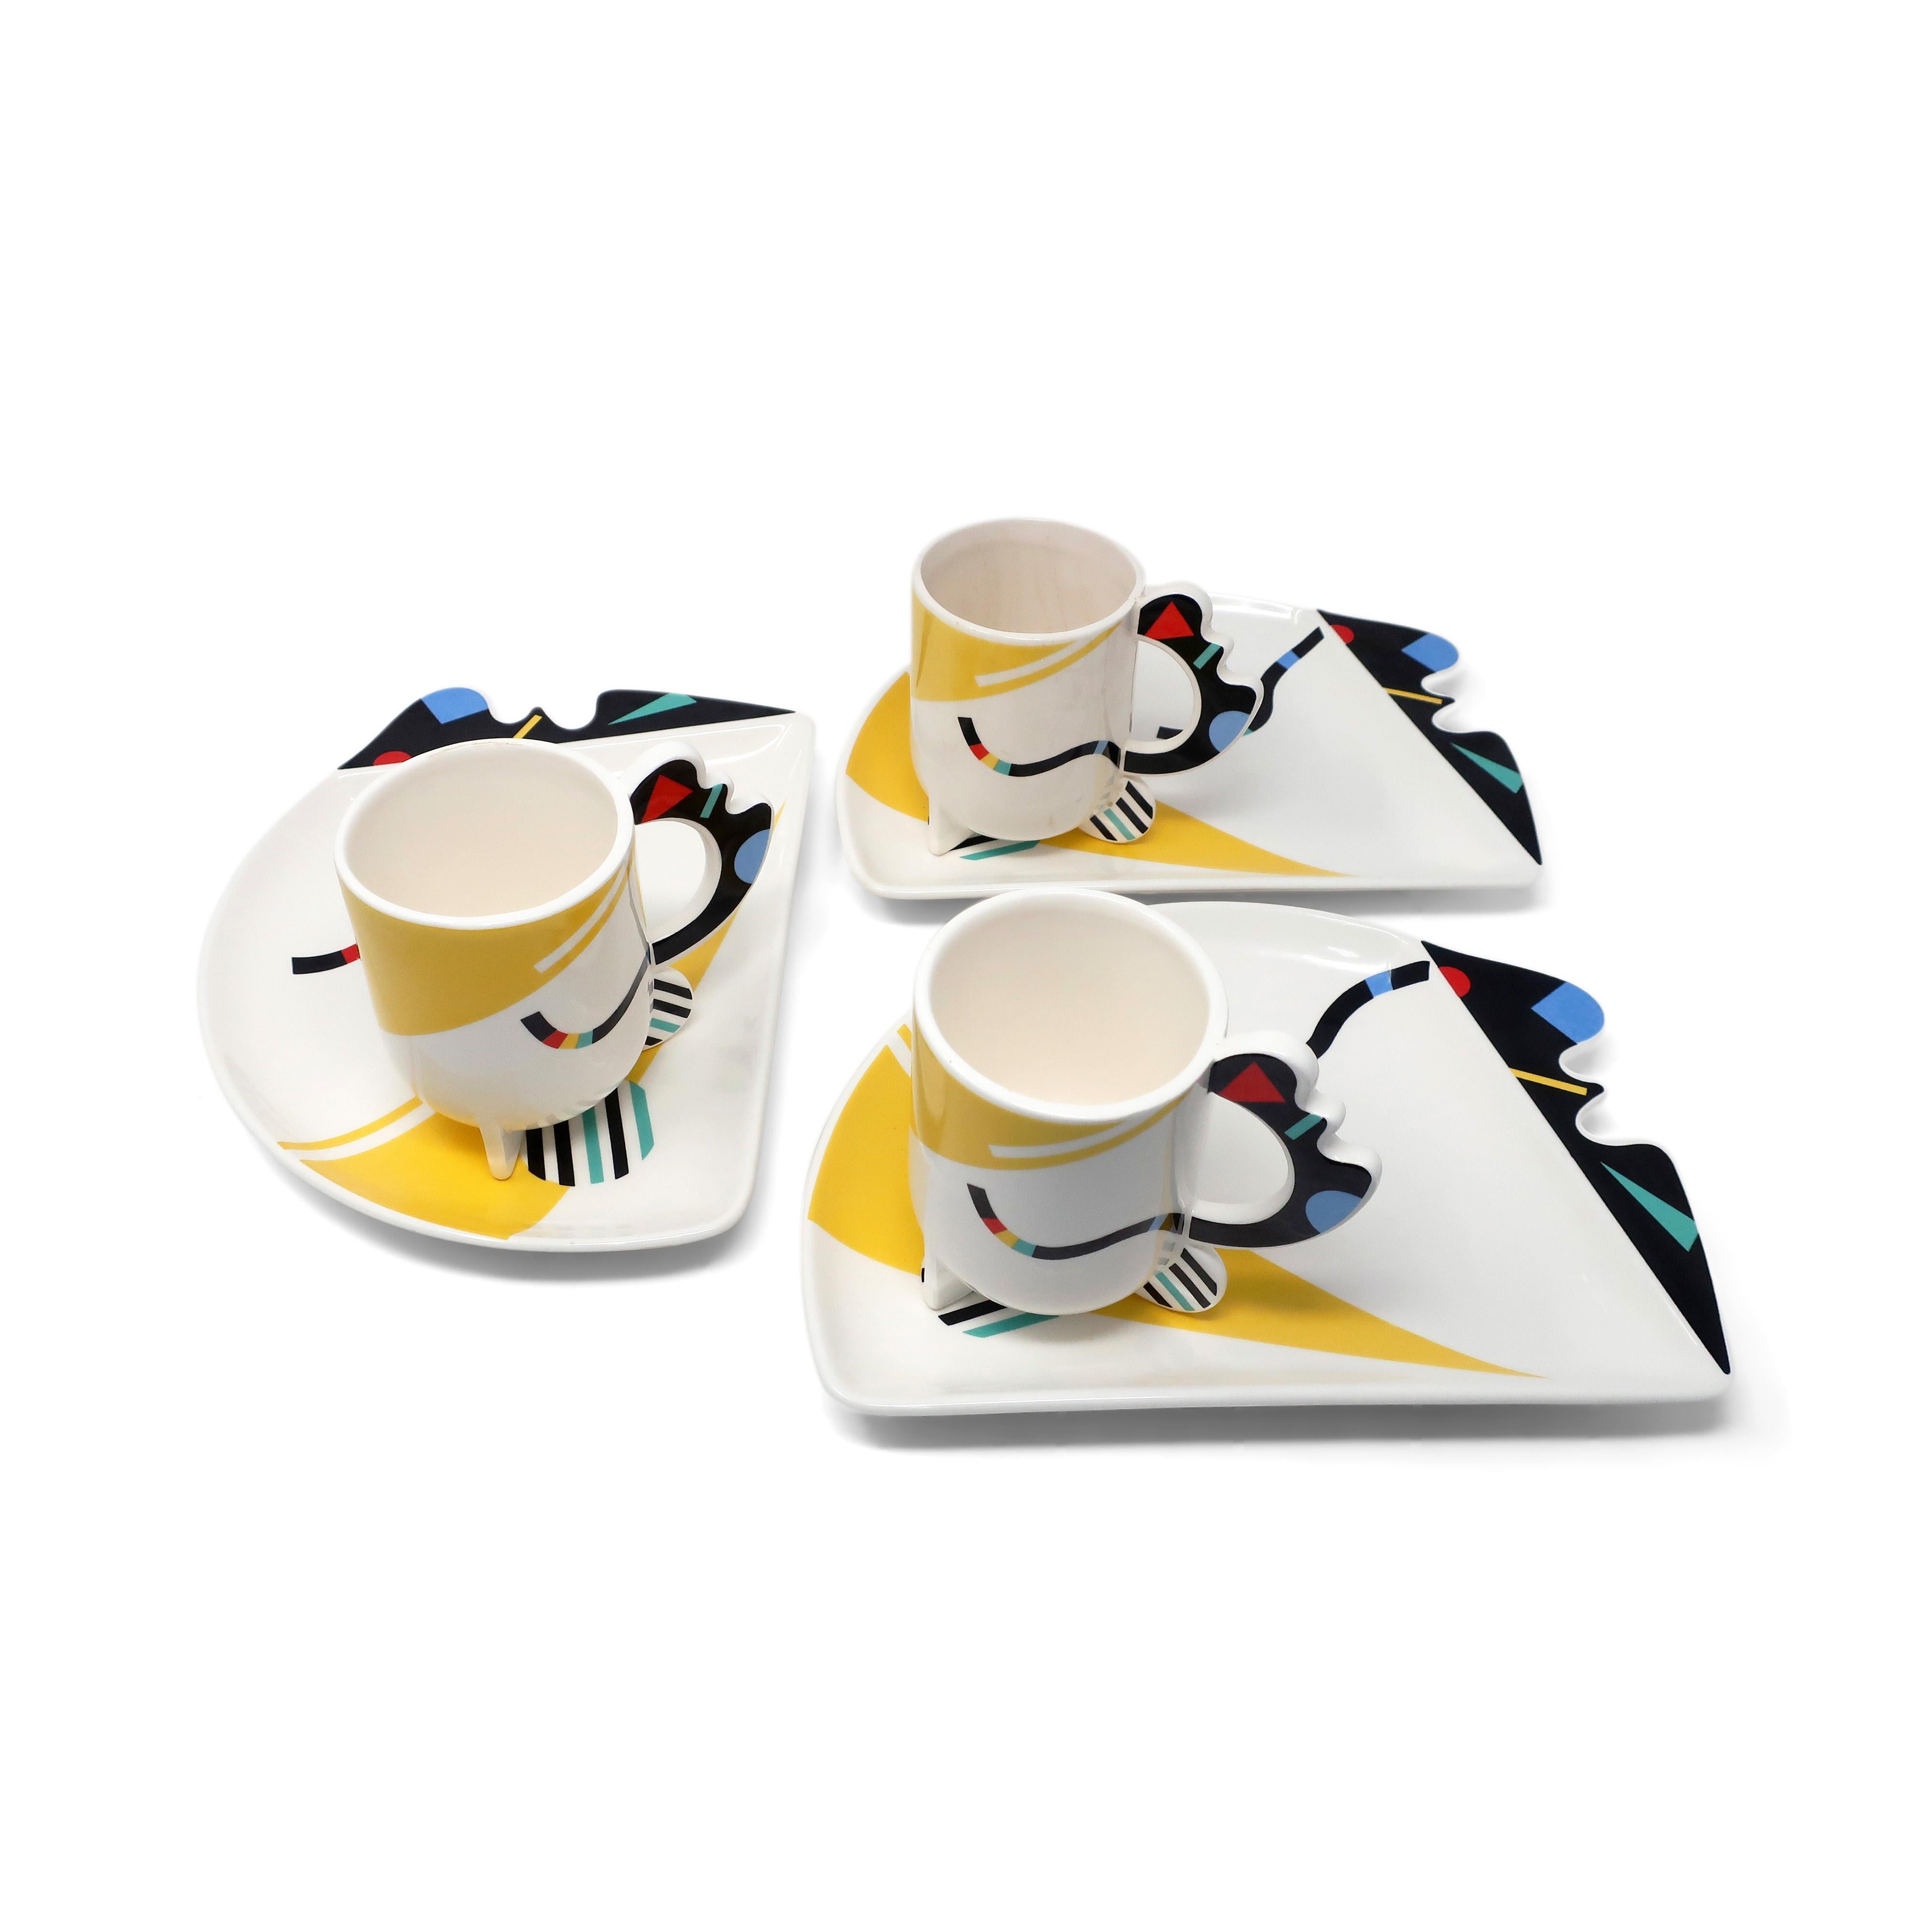 A set of 3 mugs and 3 plates in the Humoresque pattern for Kato Kogei’s Fujimori Collection. Fujimori was born in Japan in 1935 and won the National Art Award when he was just 19. He later worked in Chicago as a ceramics designer before returning to